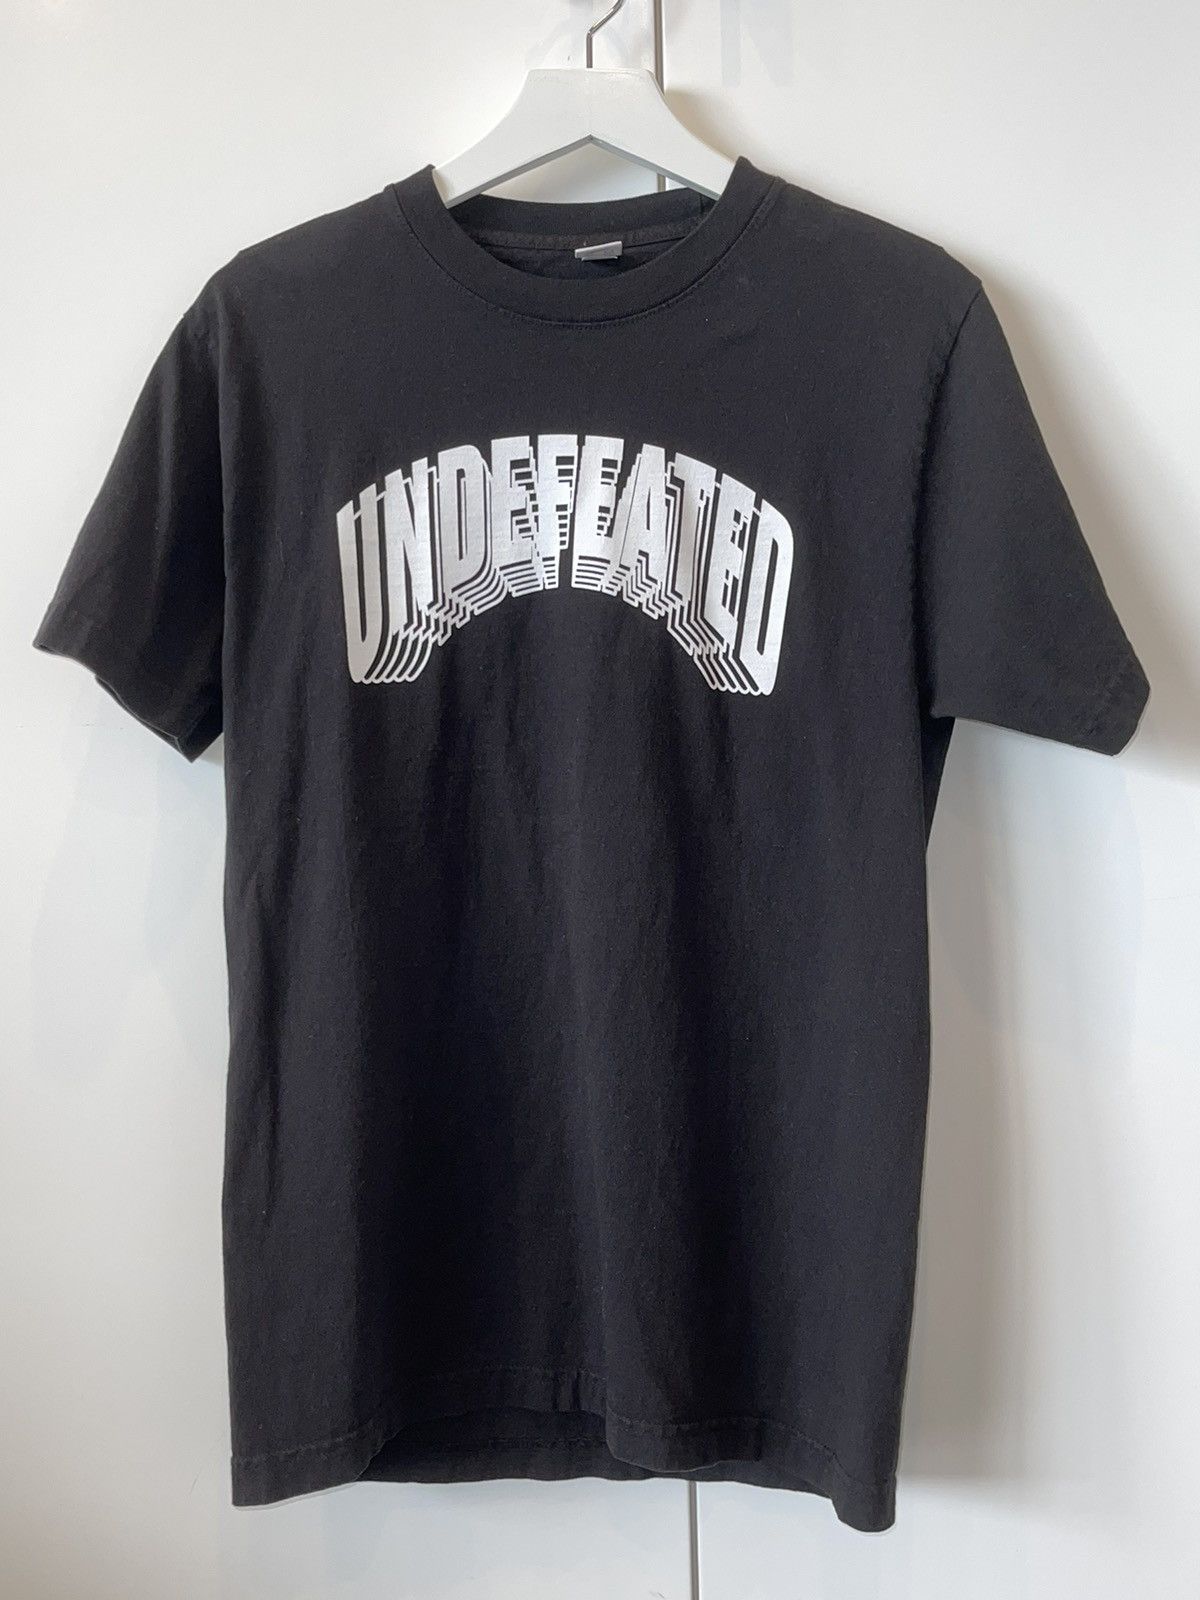 Undefeated Undefeated tee | Grailed